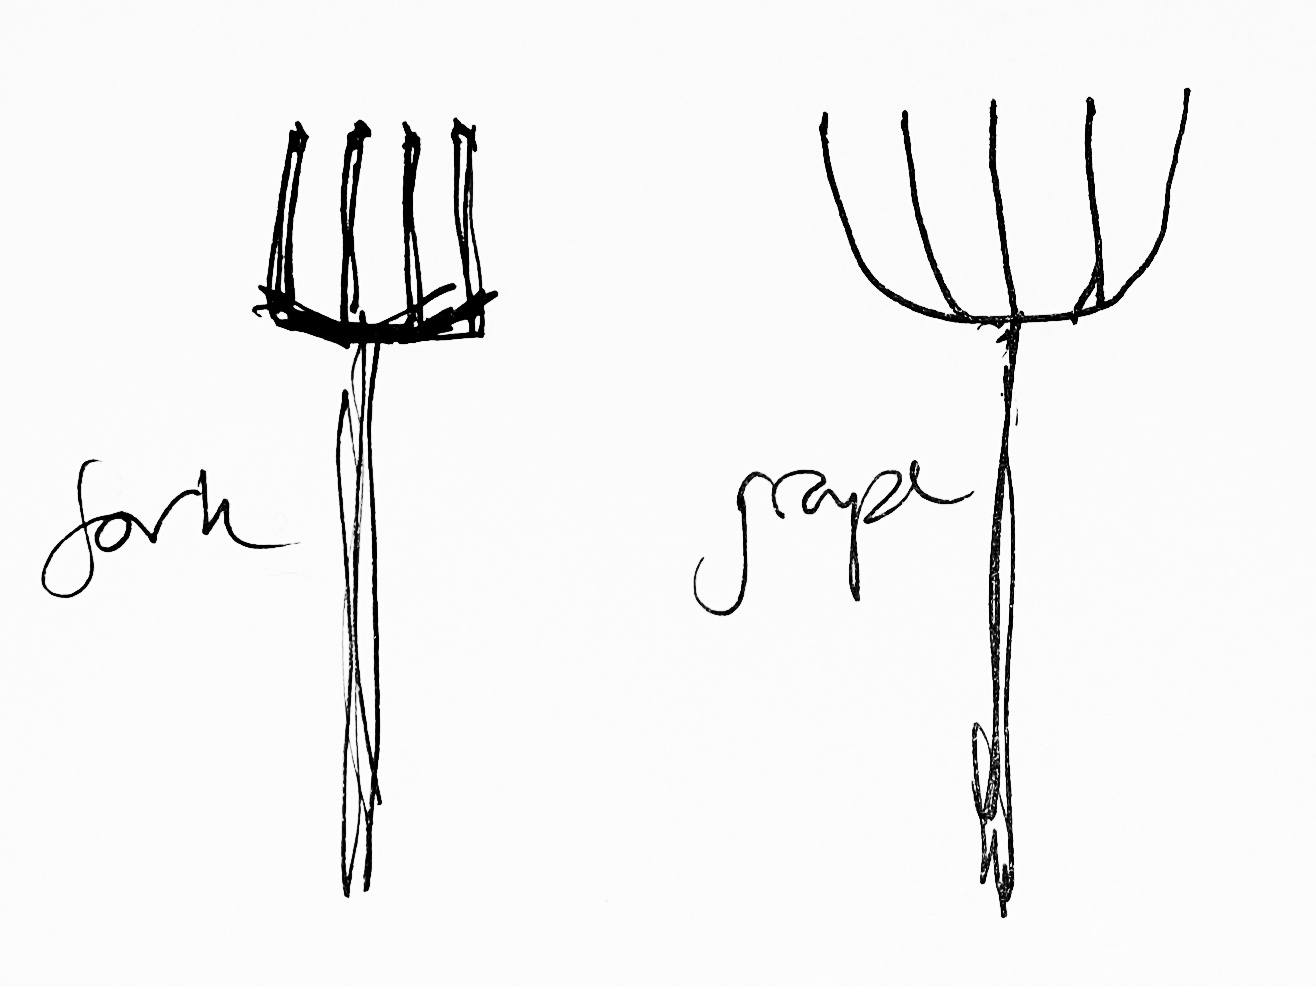 a comparison of a garden fork and a graip by my mum